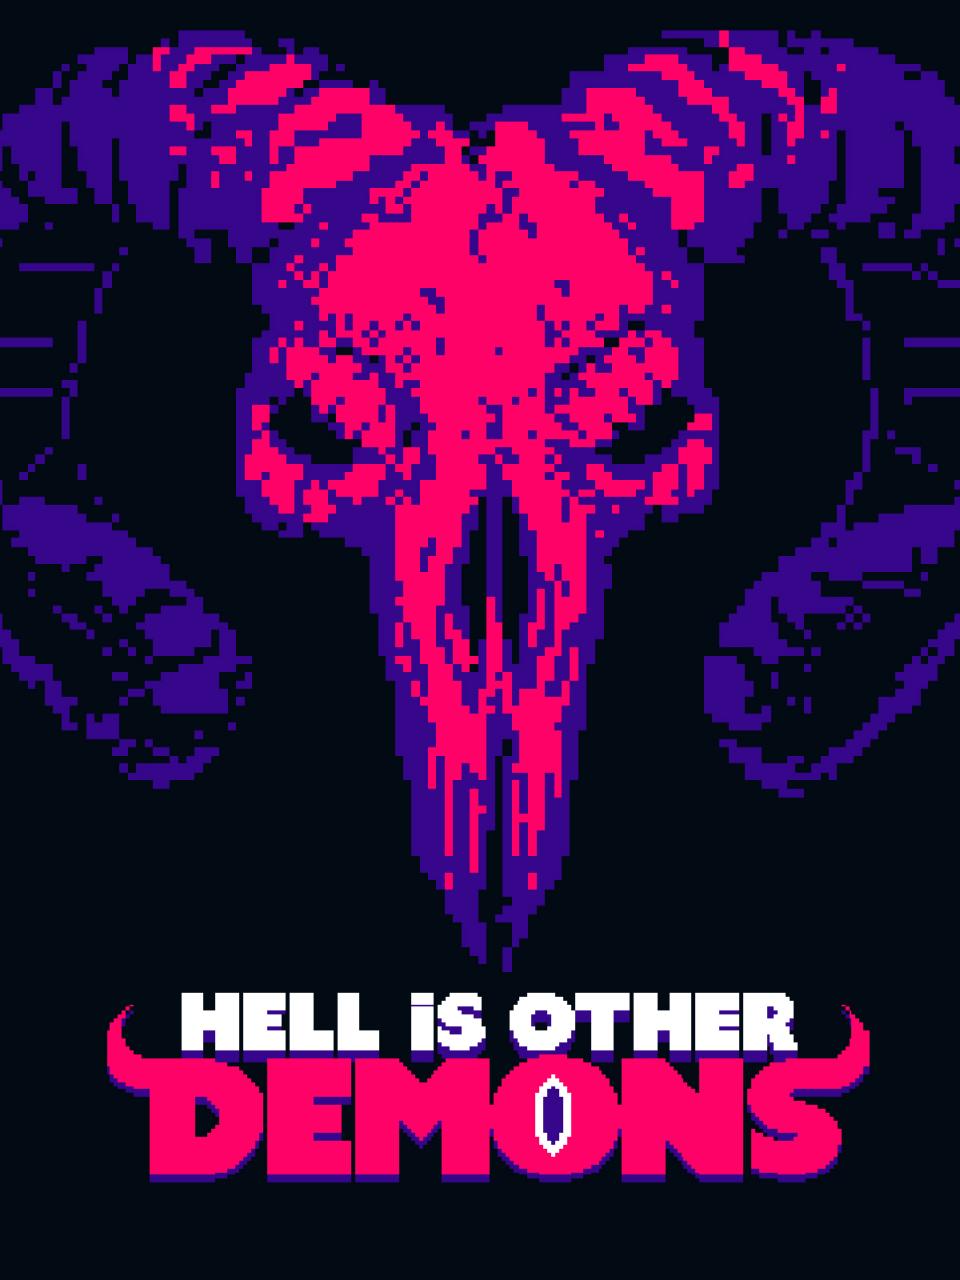 EPIC喜加一！《Hell is Other Demons》限时免费！